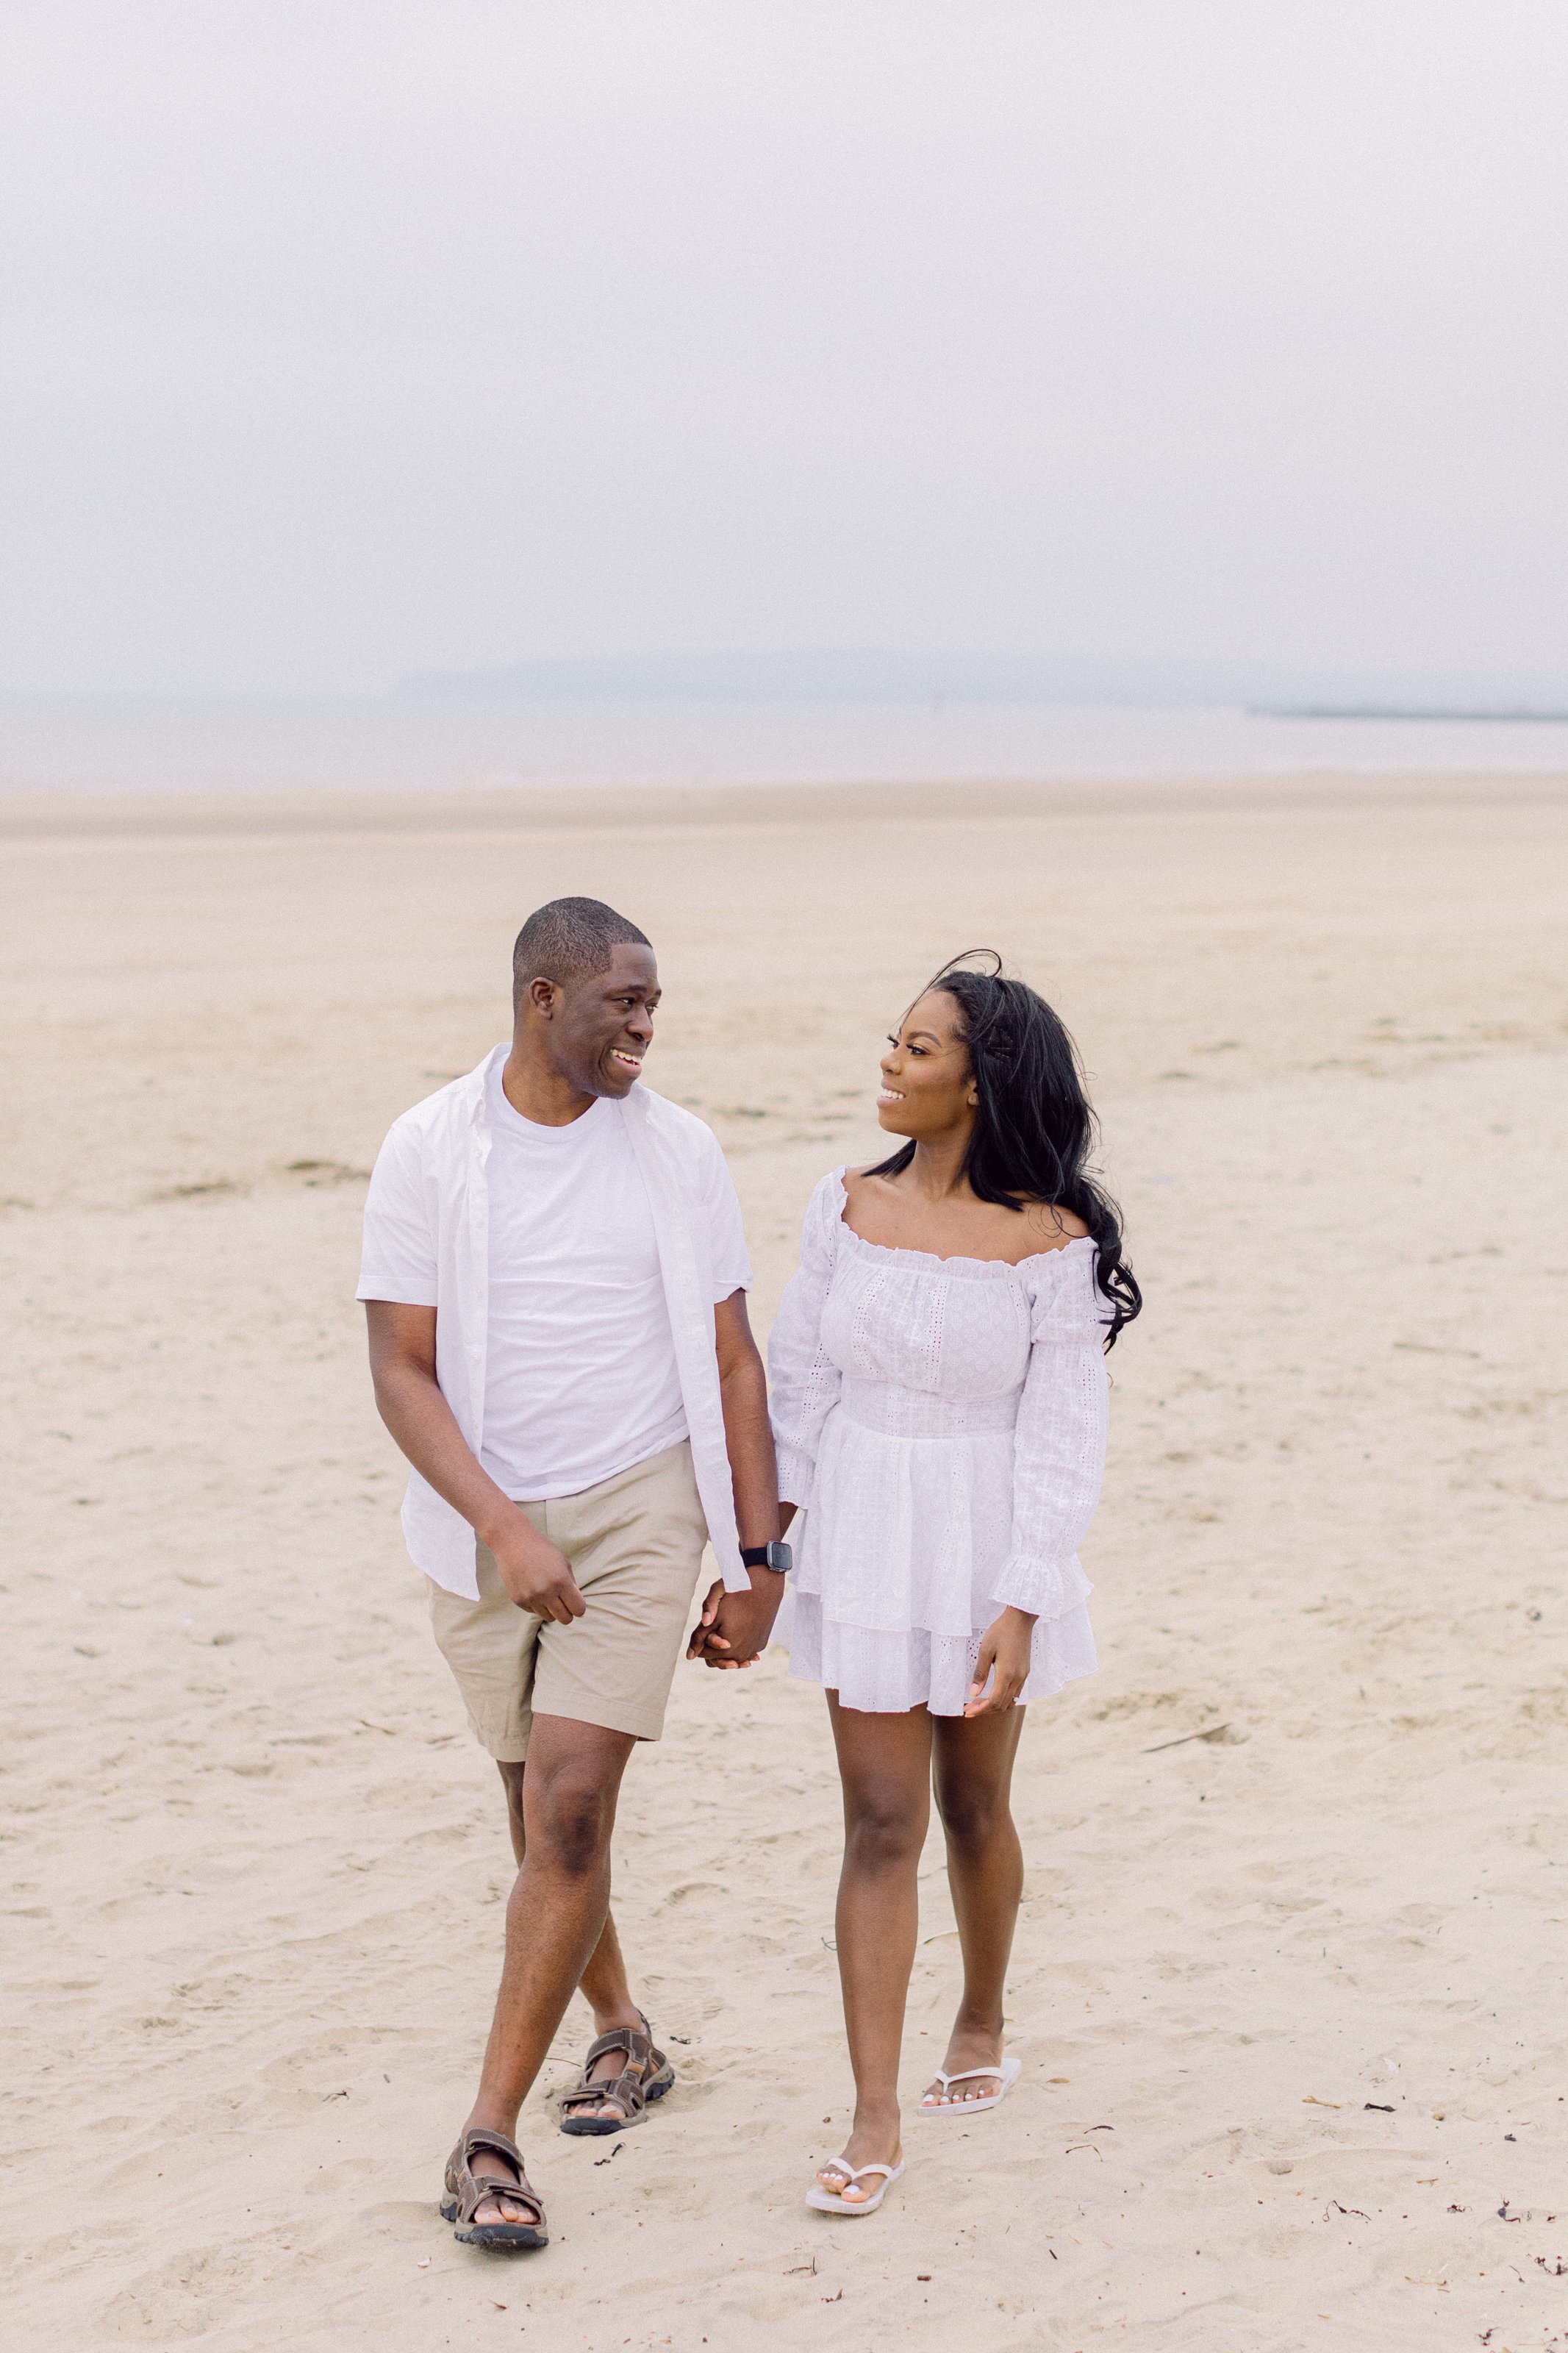  Sussex wedding photographer engagement shoot at camber sands 